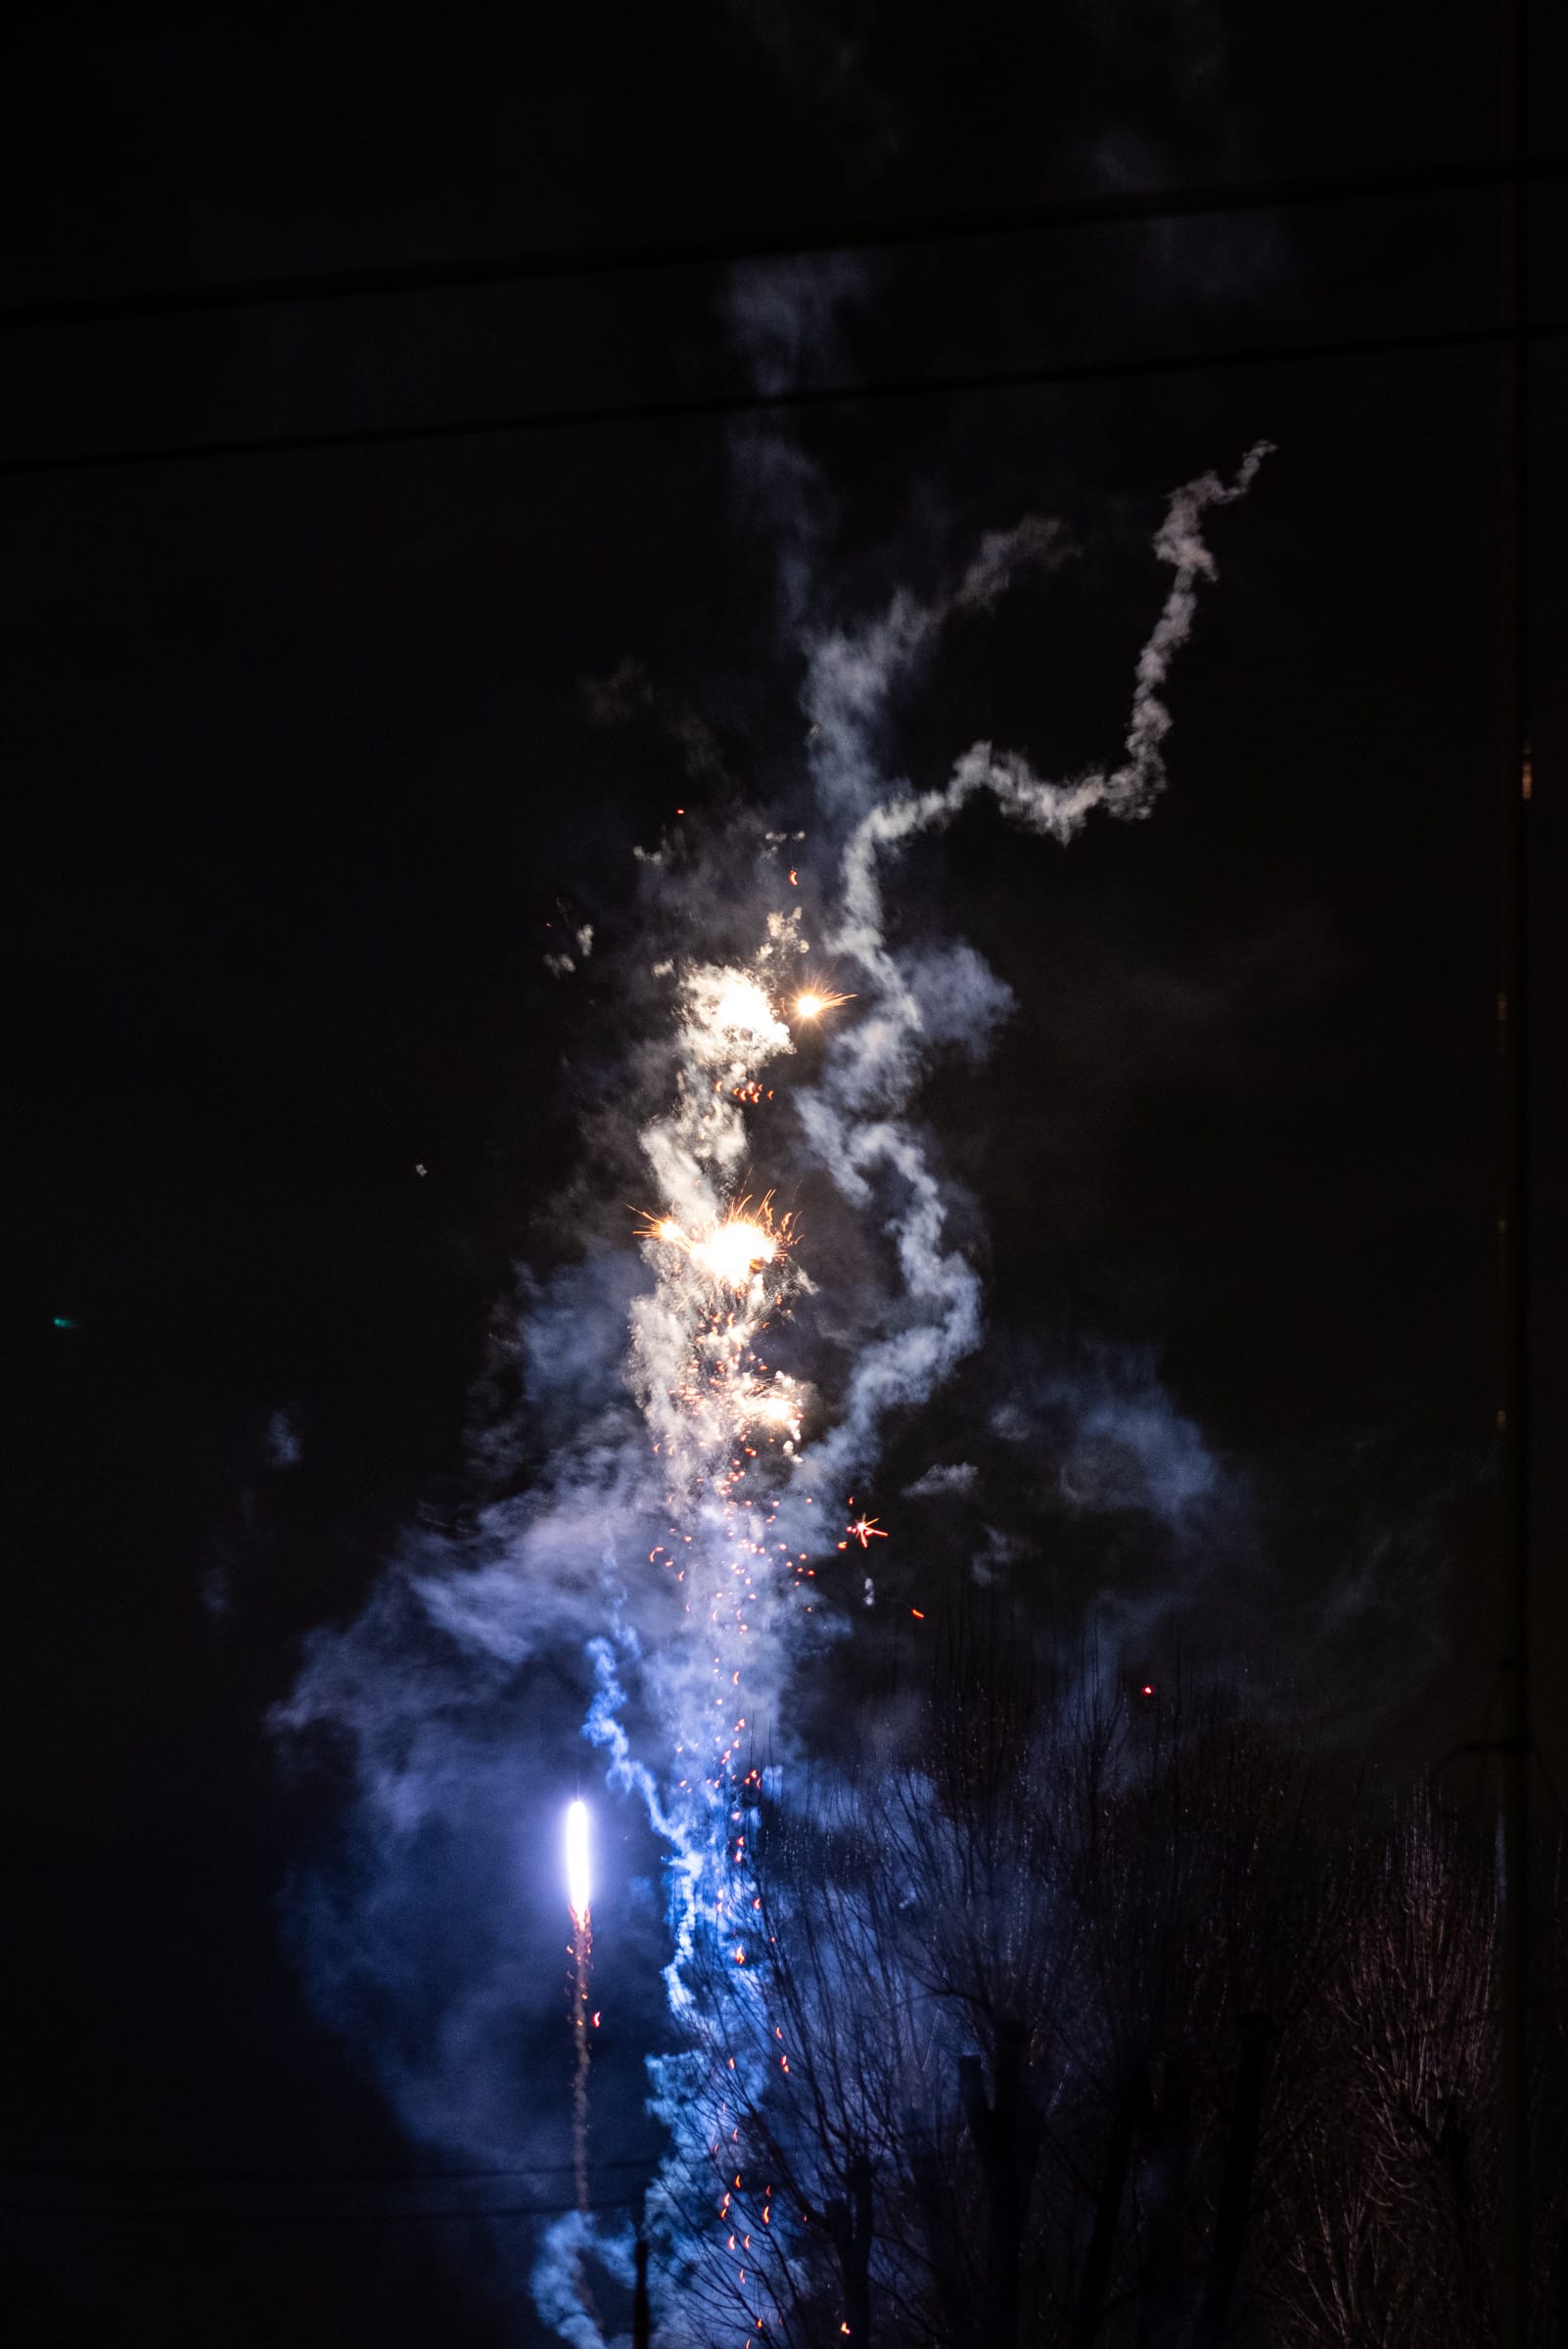 A blue firework exploding against the outline of a tree, trailing blue smoke.